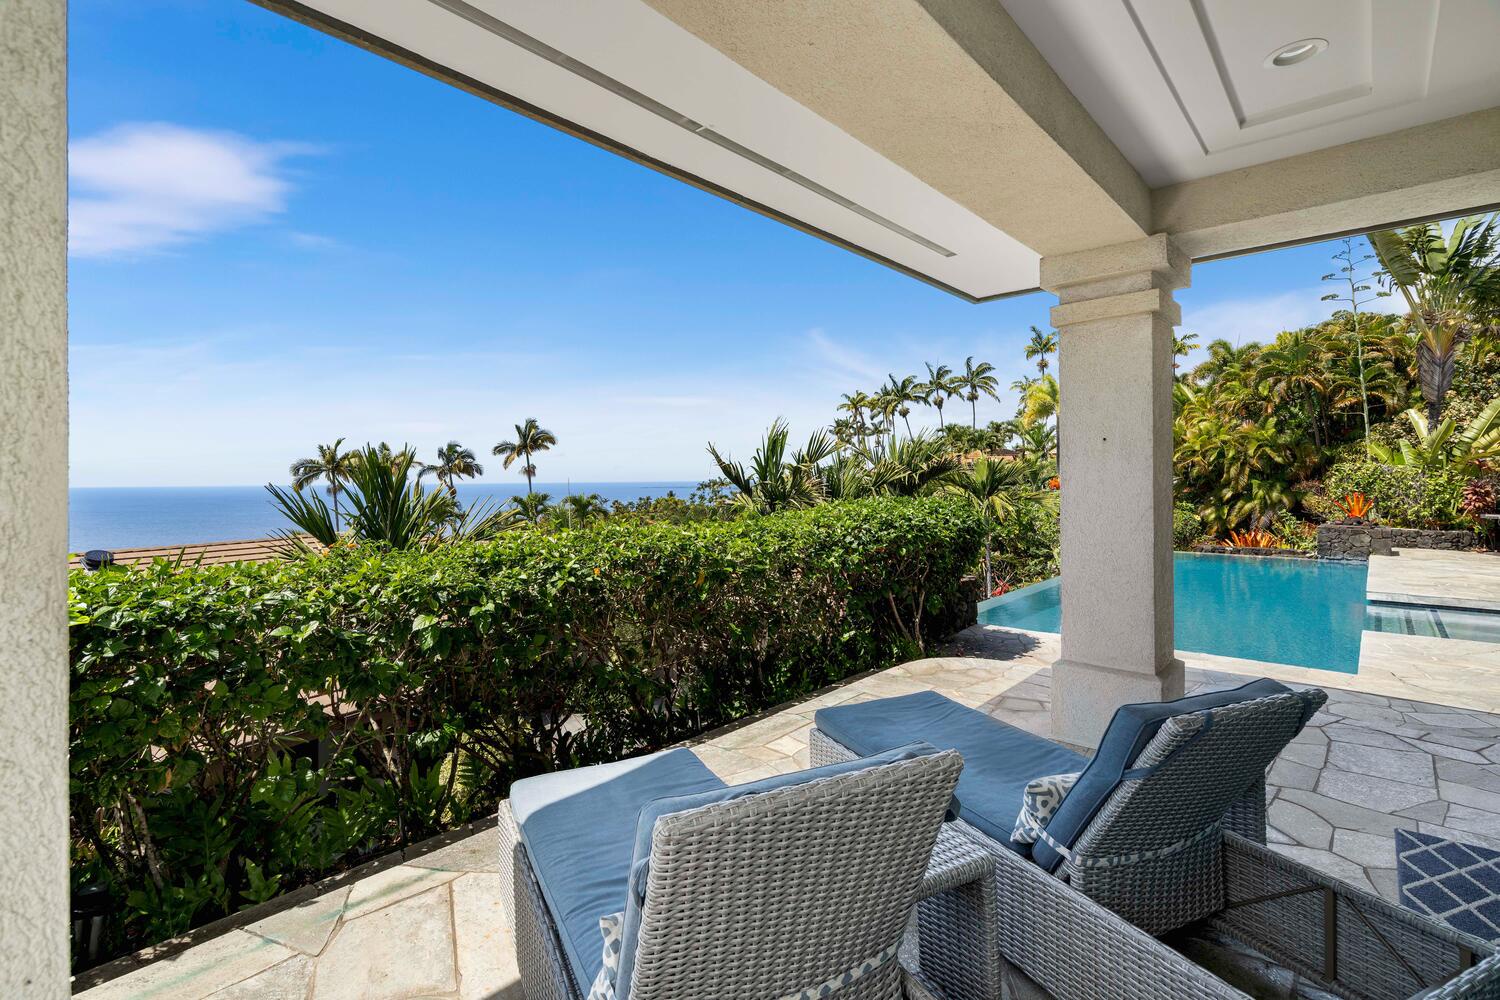 Kailua Kona Vacation Rentals, Blue Hawaii - Outdoor loungers by the pool.